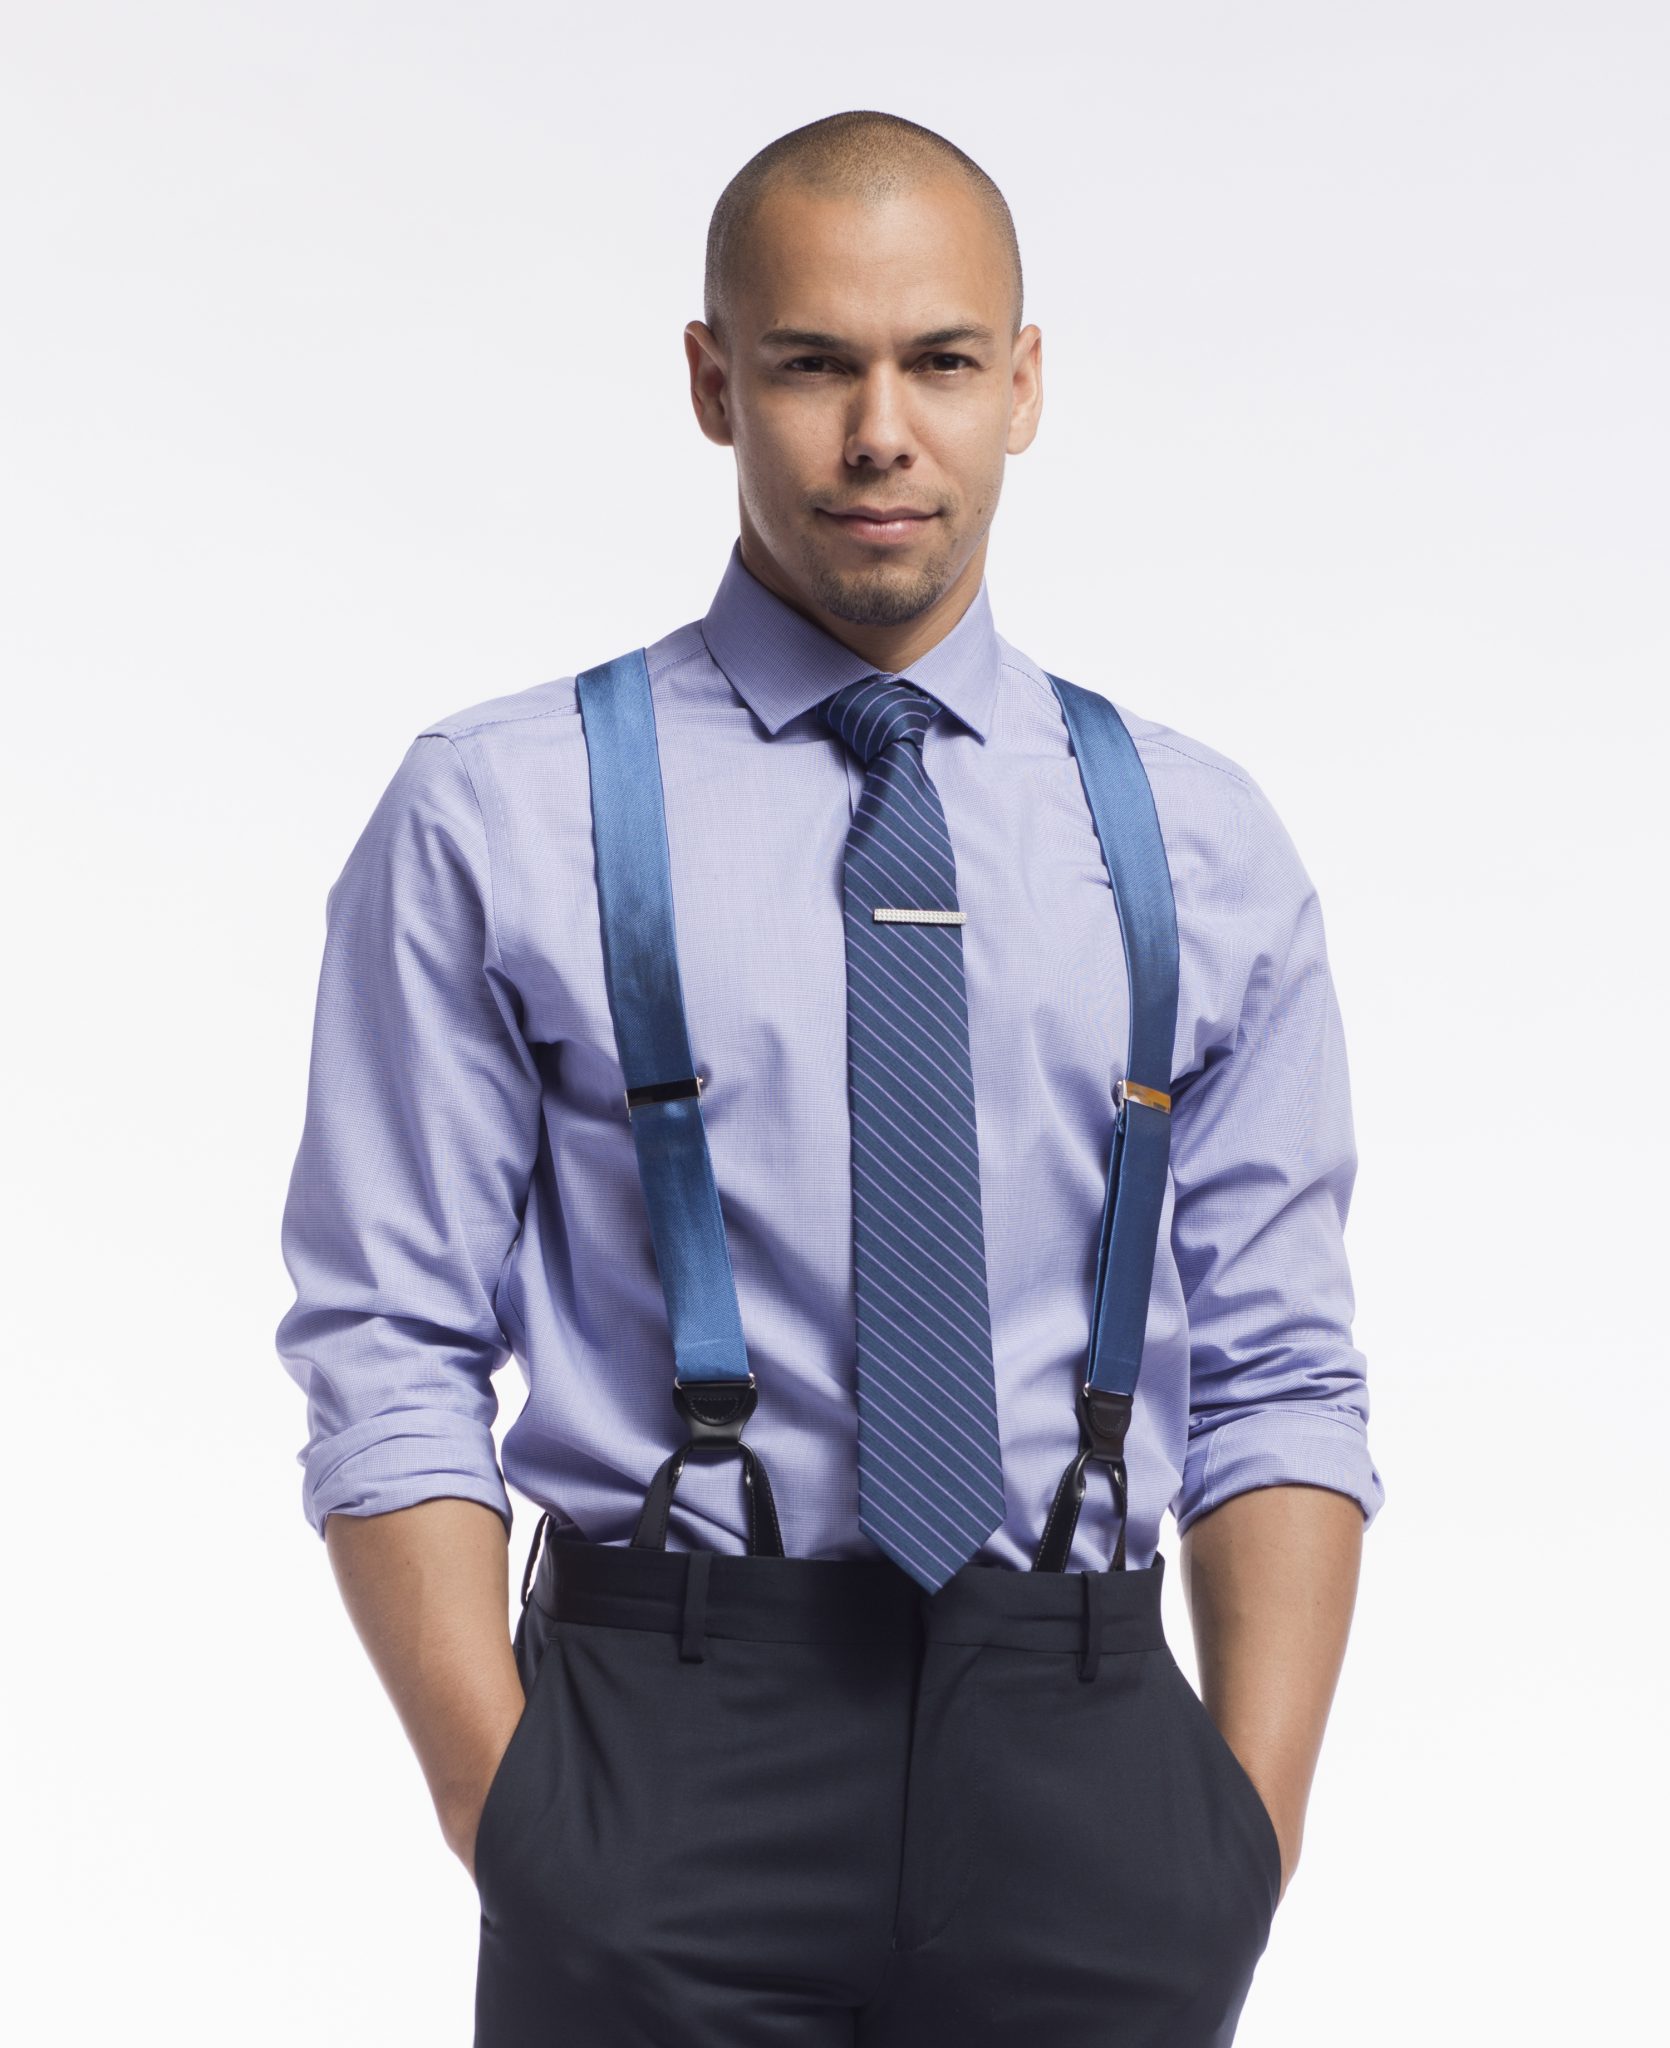 Bryton James Age, Height, Divorce. Who is he dating now?